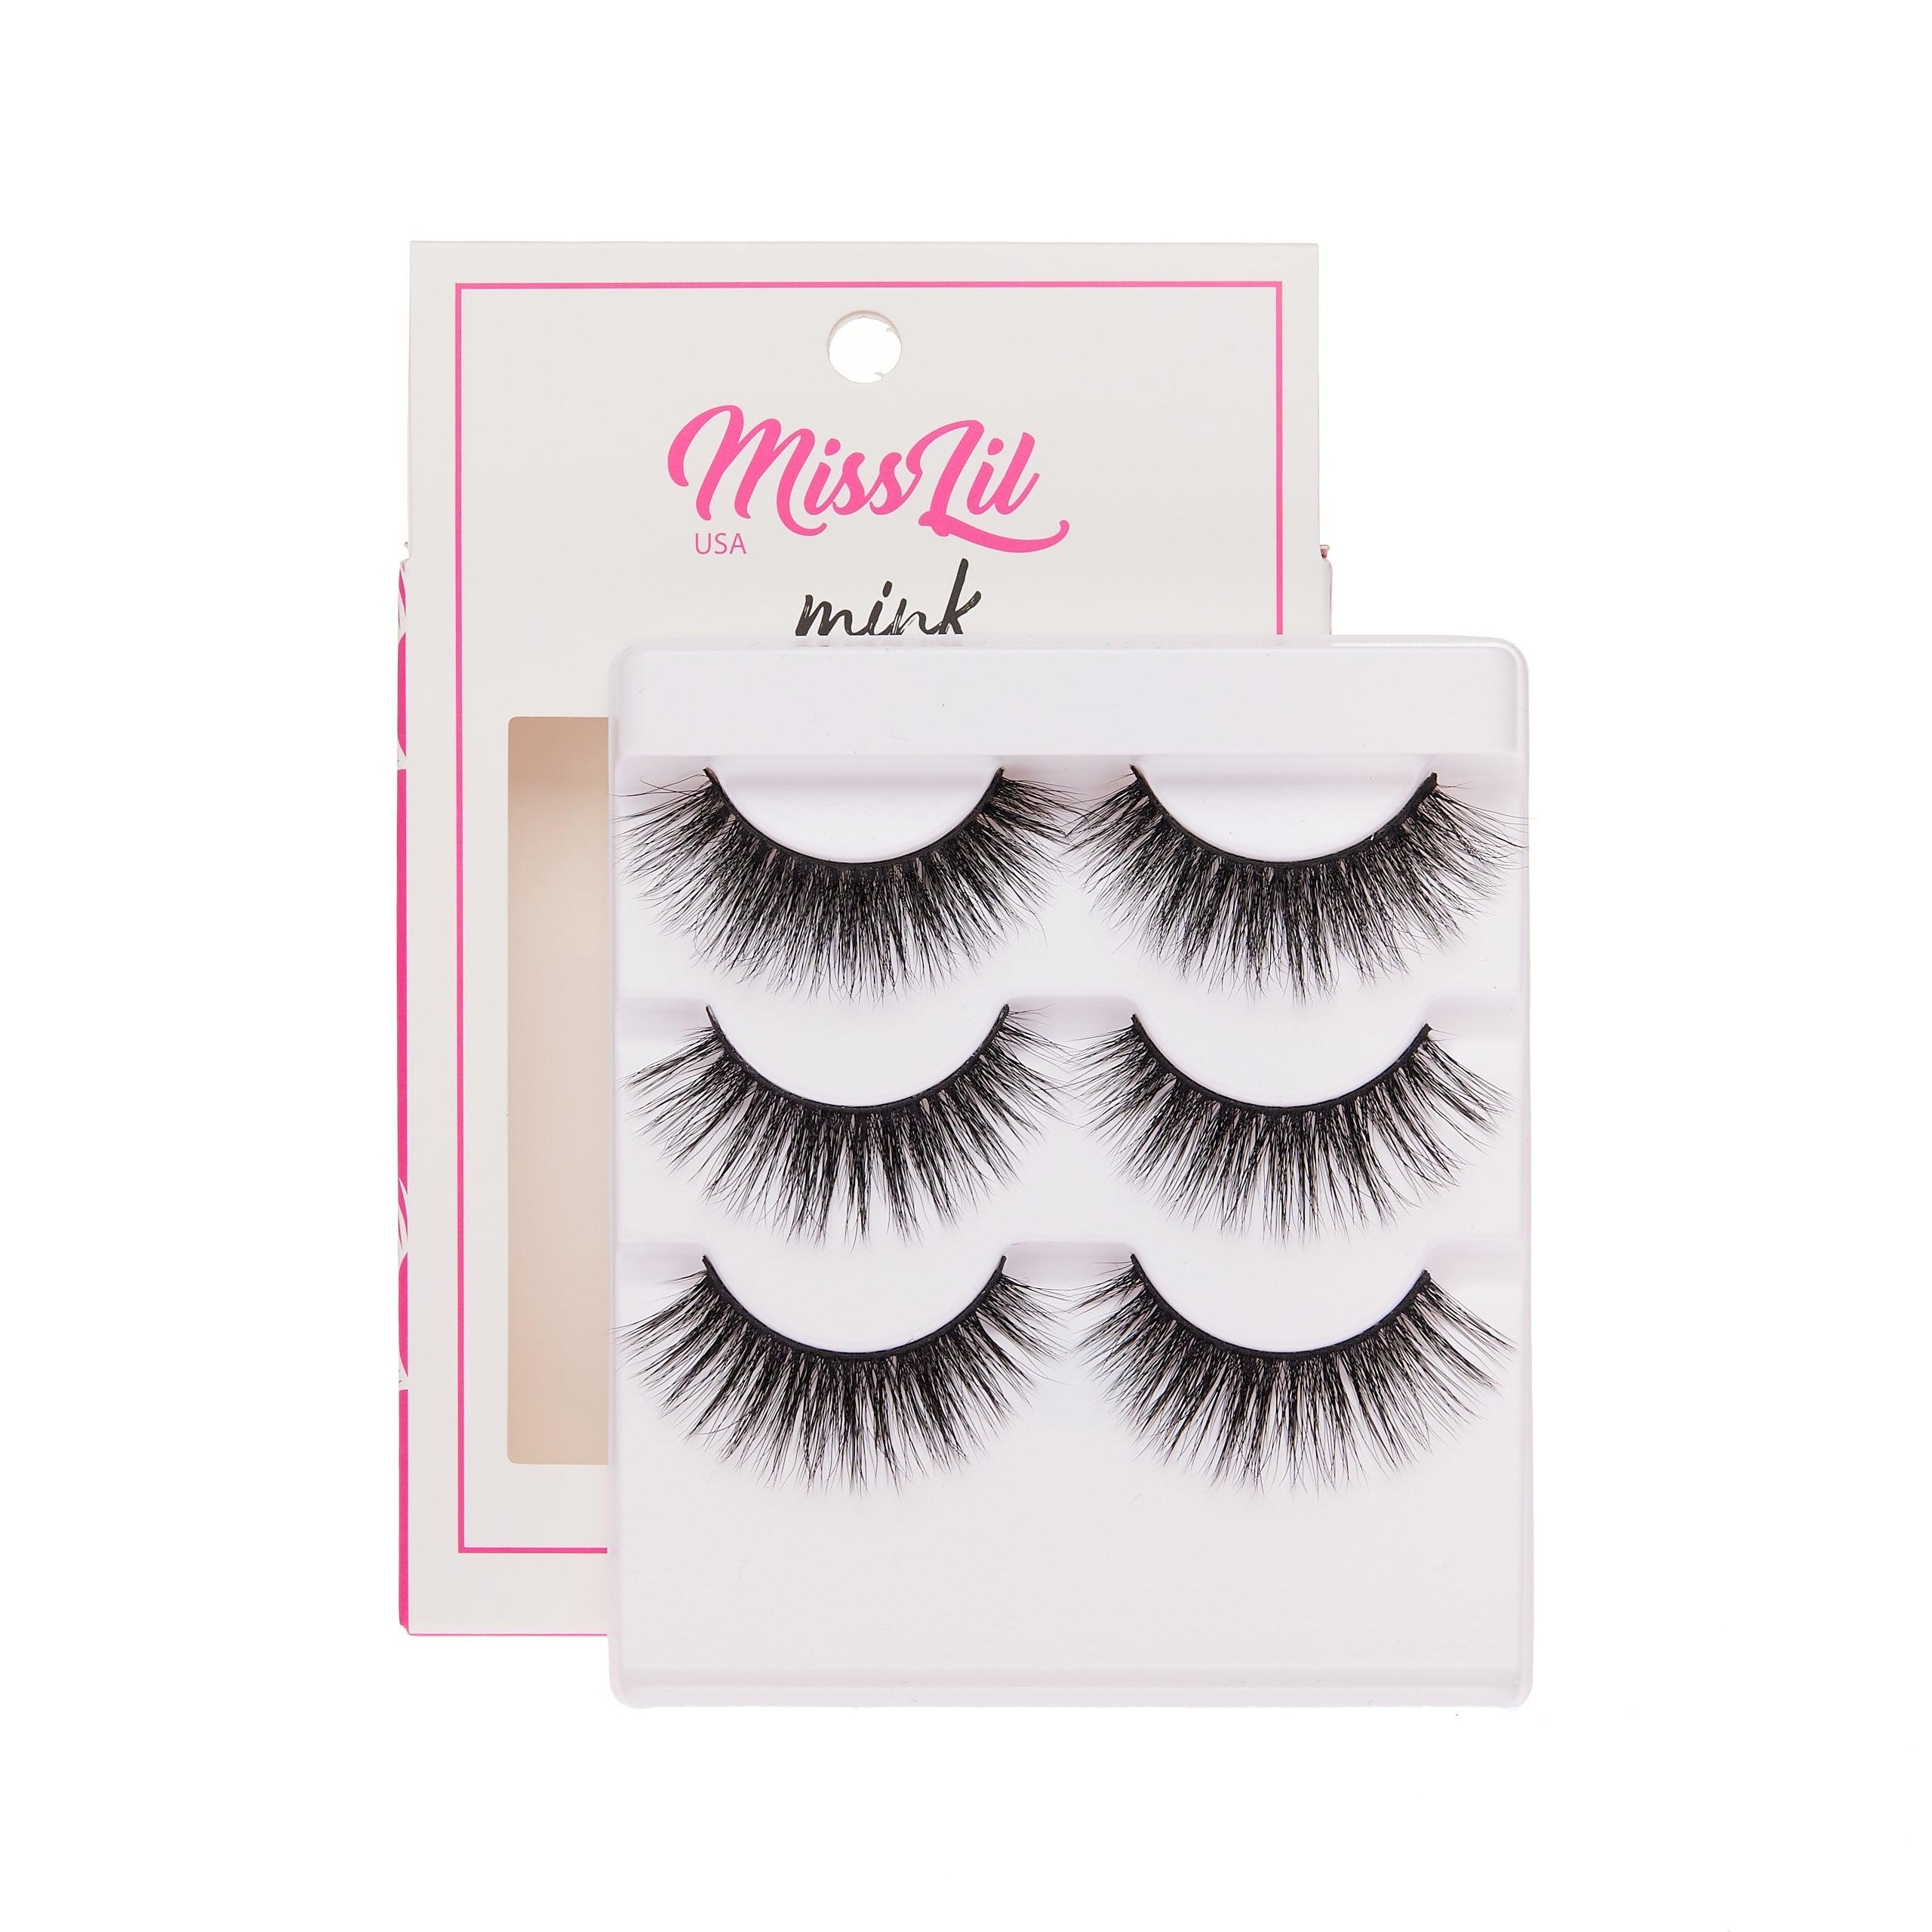 3-Pair Eyelashes - Lash Party Collection #3 ( Pack of 12) - Miss Lil USA Wholesale